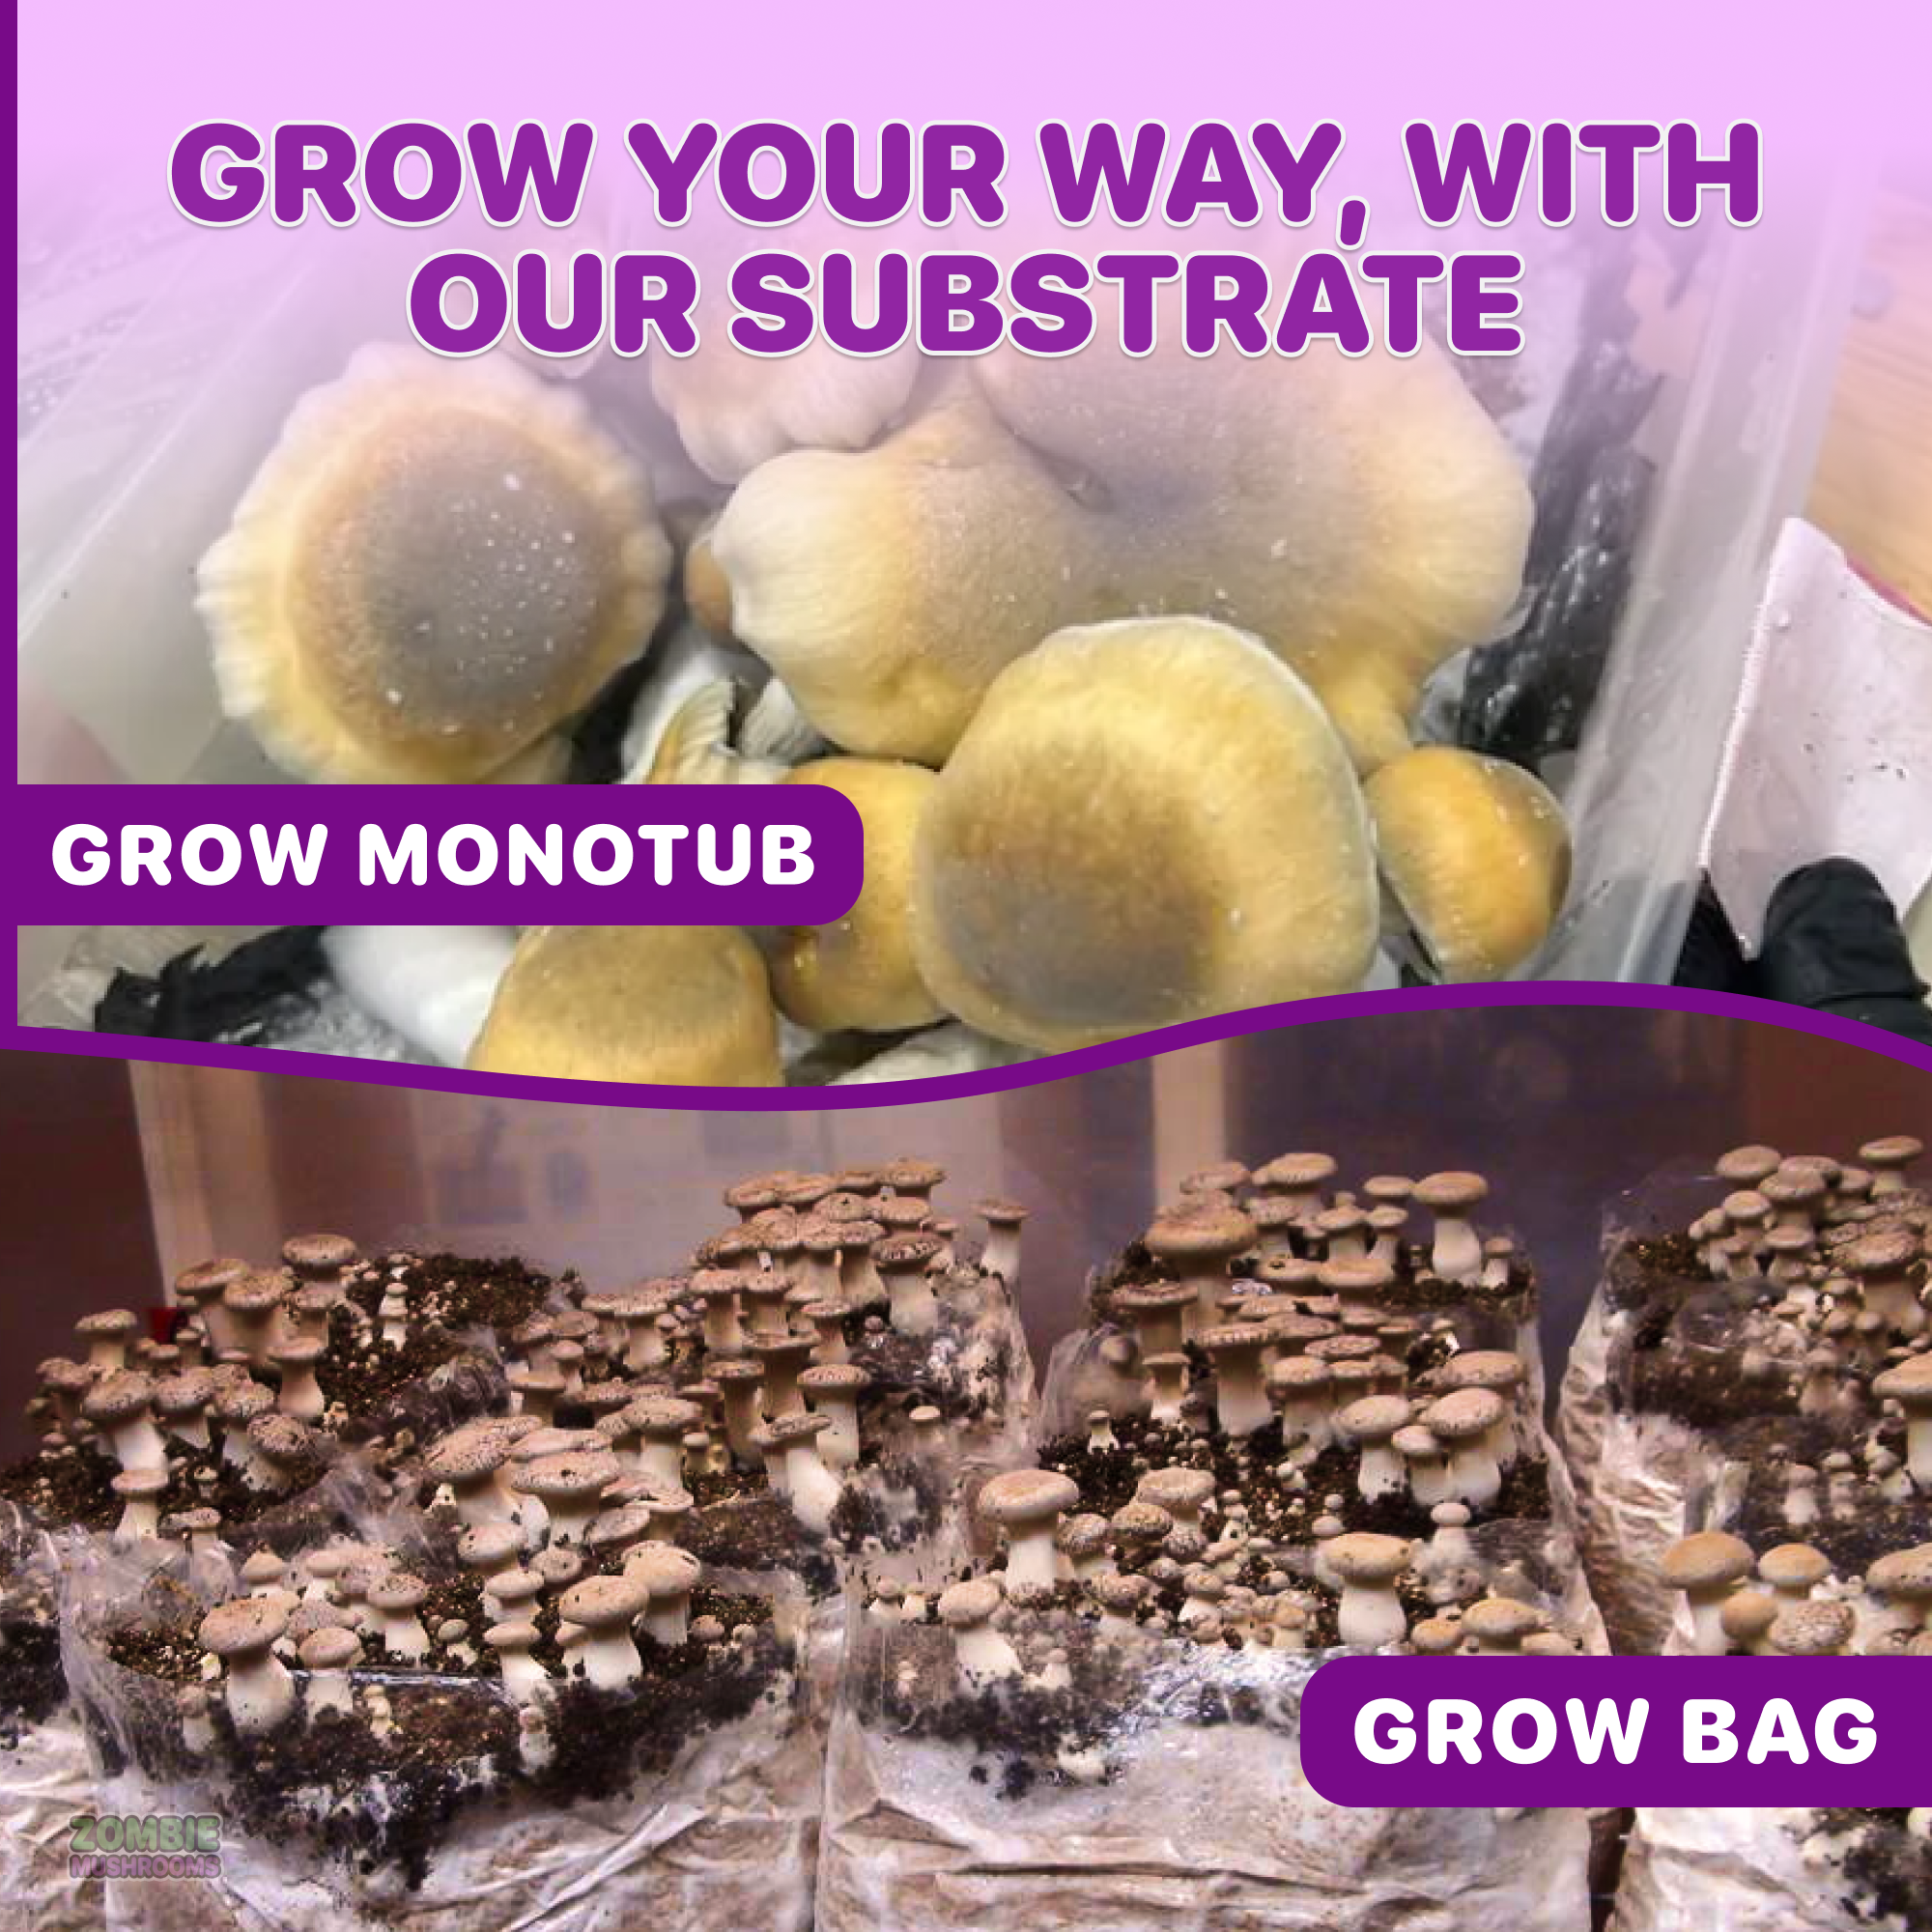 grow your way with our substrate ( grow monotub and grow bag)